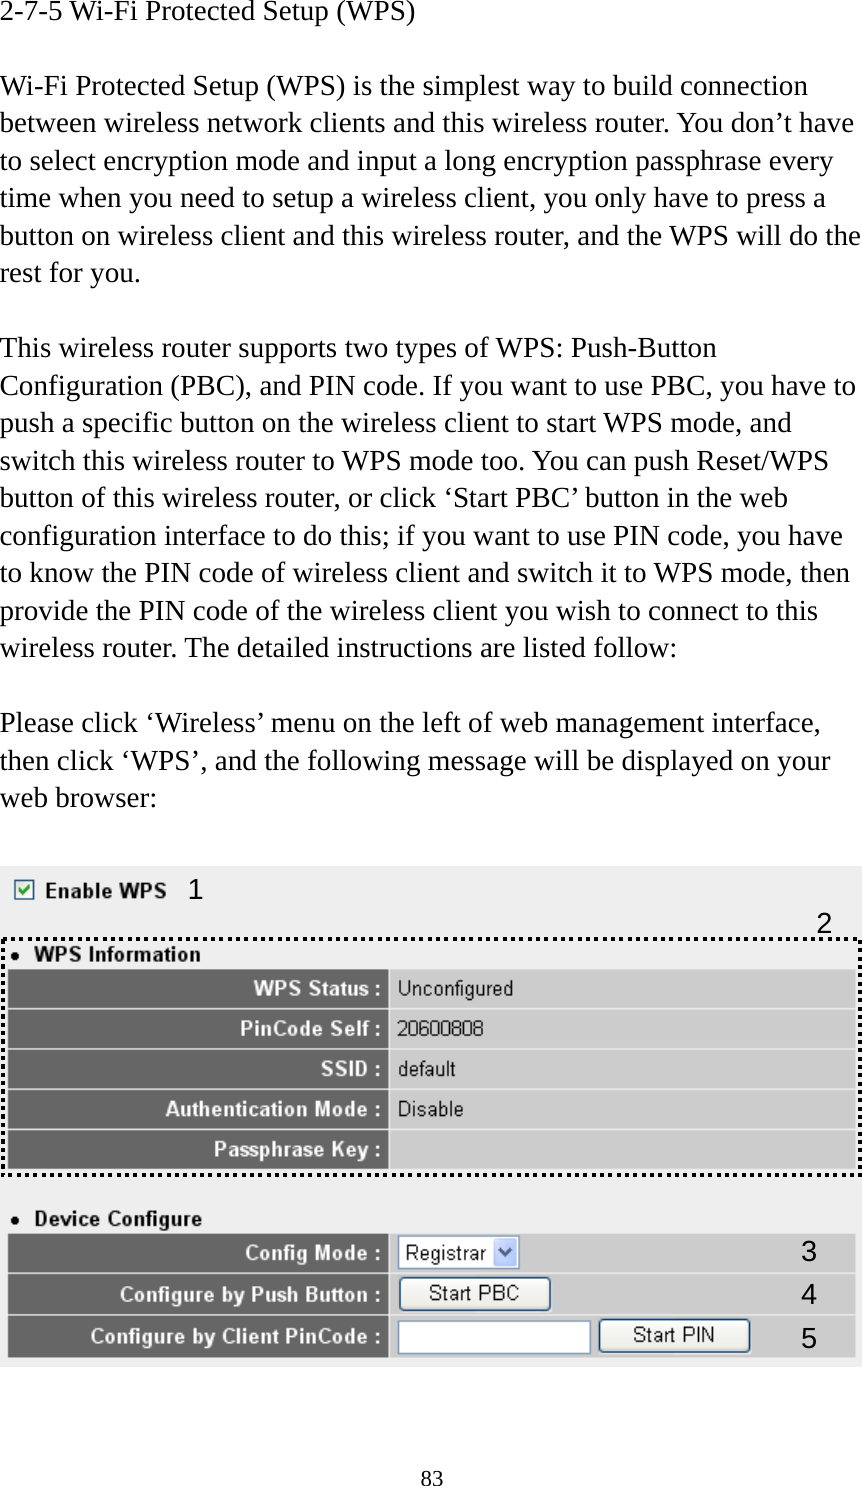 83 2-7-5 Wi-Fi Protected Setup (WPS)  Wi-Fi Protected Setup (WPS) is the simplest way to build connection between wireless network clients and this wireless router. You don’t have to select encryption mode and input a long encryption passphrase every time when you need to setup a wireless client, you only have to press a button on wireless client and this wireless router, and the WPS will do the rest for you.  This wireless router supports two types of WPS: Push-Button Configuration (PBC), and PIN code. If you want to use PBC, you have to push a specific button on the wireless client to start WPS mode, and switch this wireless router to WPS mode too. You can push Reset/WPS button of this wireless router, or click ‘Start PBC’ button in the web configuration interface to do this; if you want to use PIN code, you have to know the PIN code of wireless client and switch it to WPS mode, then provide the PIN code of the wireless client you wish to connect to this wireless router. The detailed instructions are listed follow:  Please click ‘Wireless’ menu on the left of web management interface, then click ‘WPS’, and the following message will be displayed on your web browser:    1 34 25 